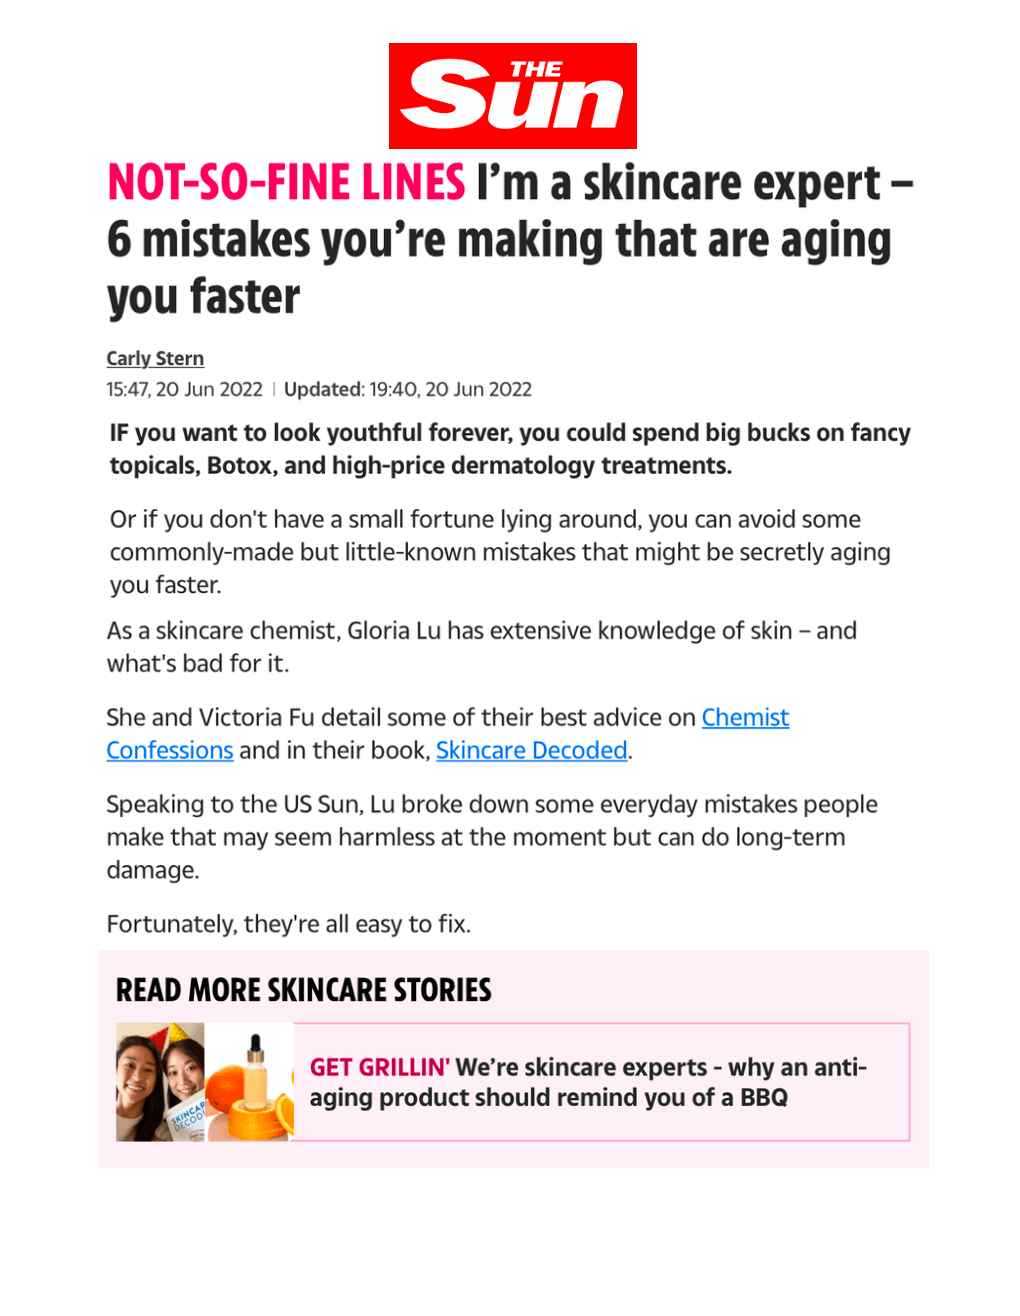 NOT-SO-FINE LINES I’m a skincare expert – 6 mistakes you’re making that are aging you faster
Featured Brands include:Chemist Confessions

Read More